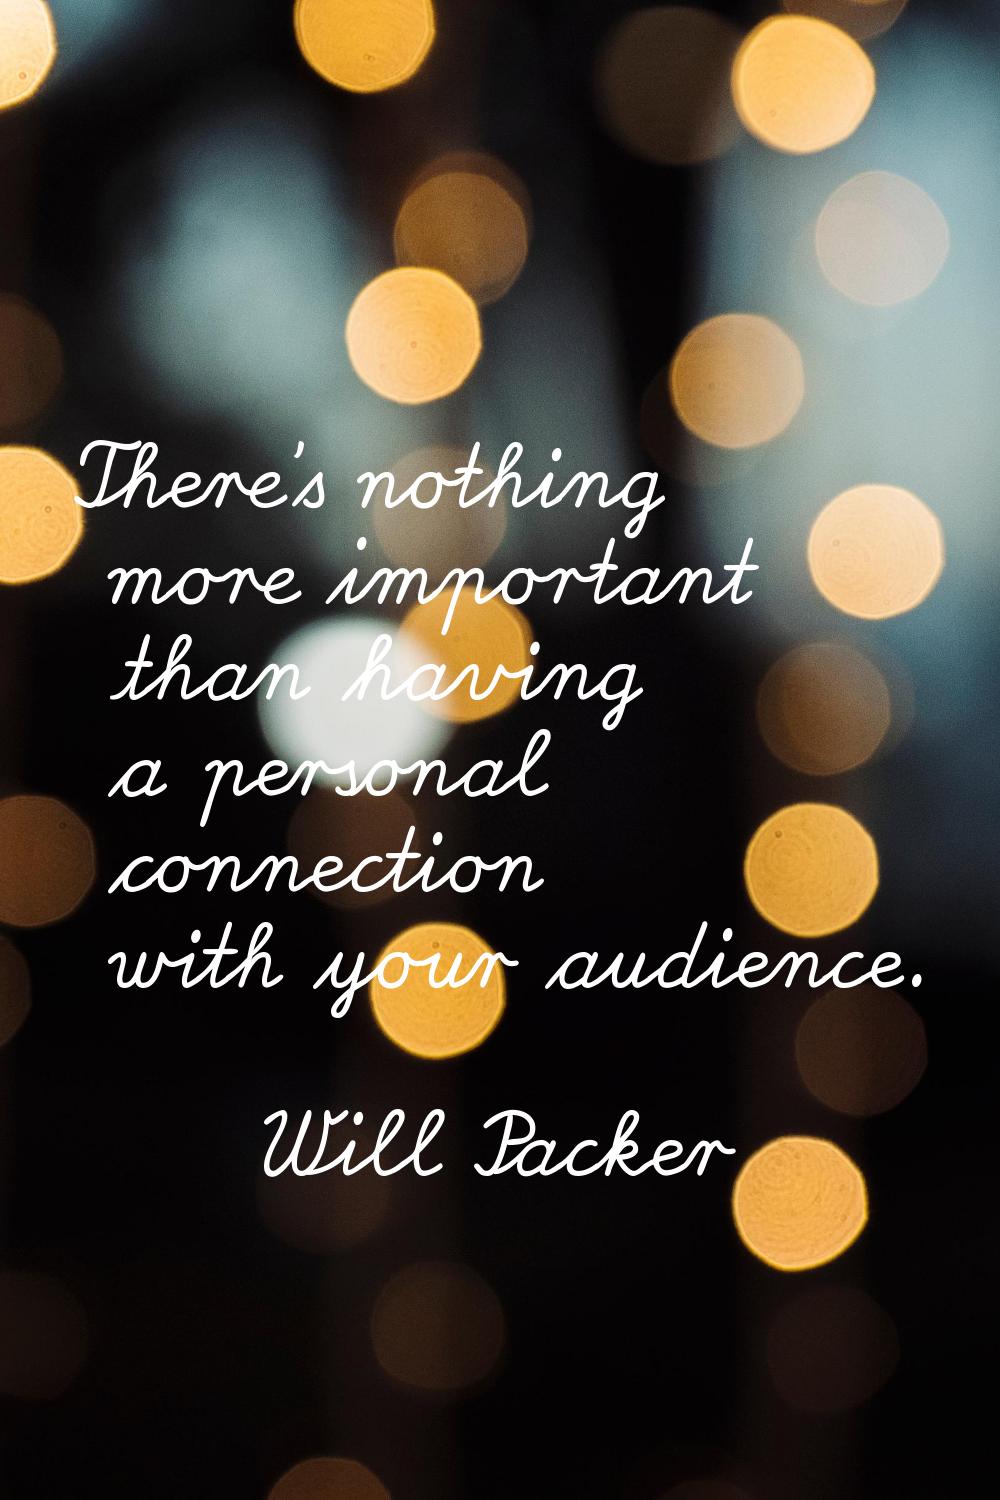 There's nothing more important than having a personal connection with your audience.